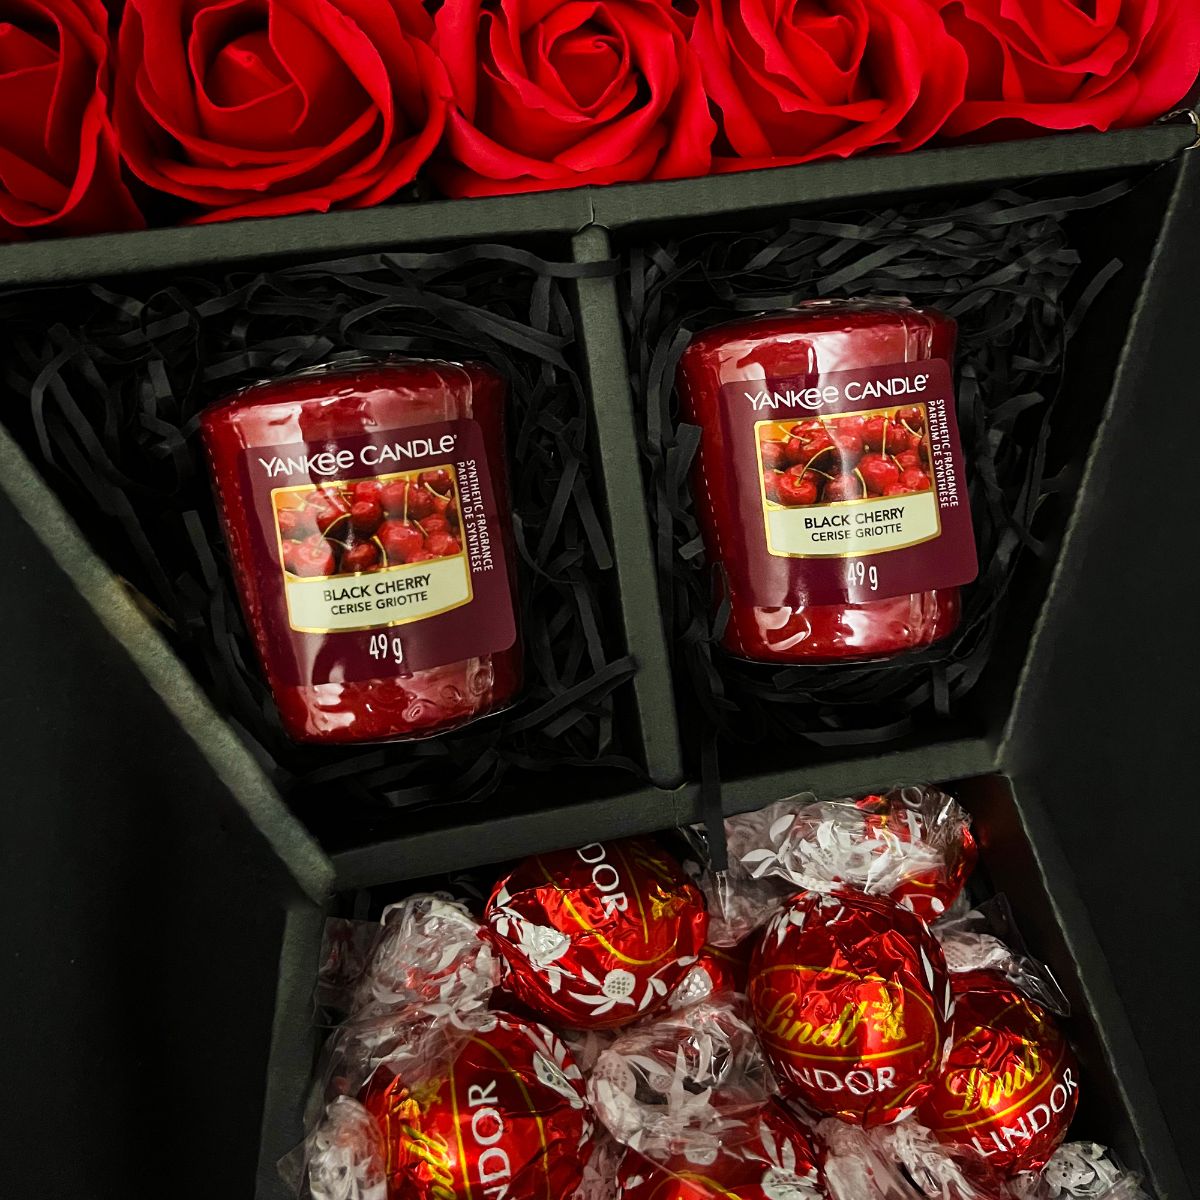 Lindt Lindor & Yankee Candle Signature Chocolate Bouquet With Red Roses